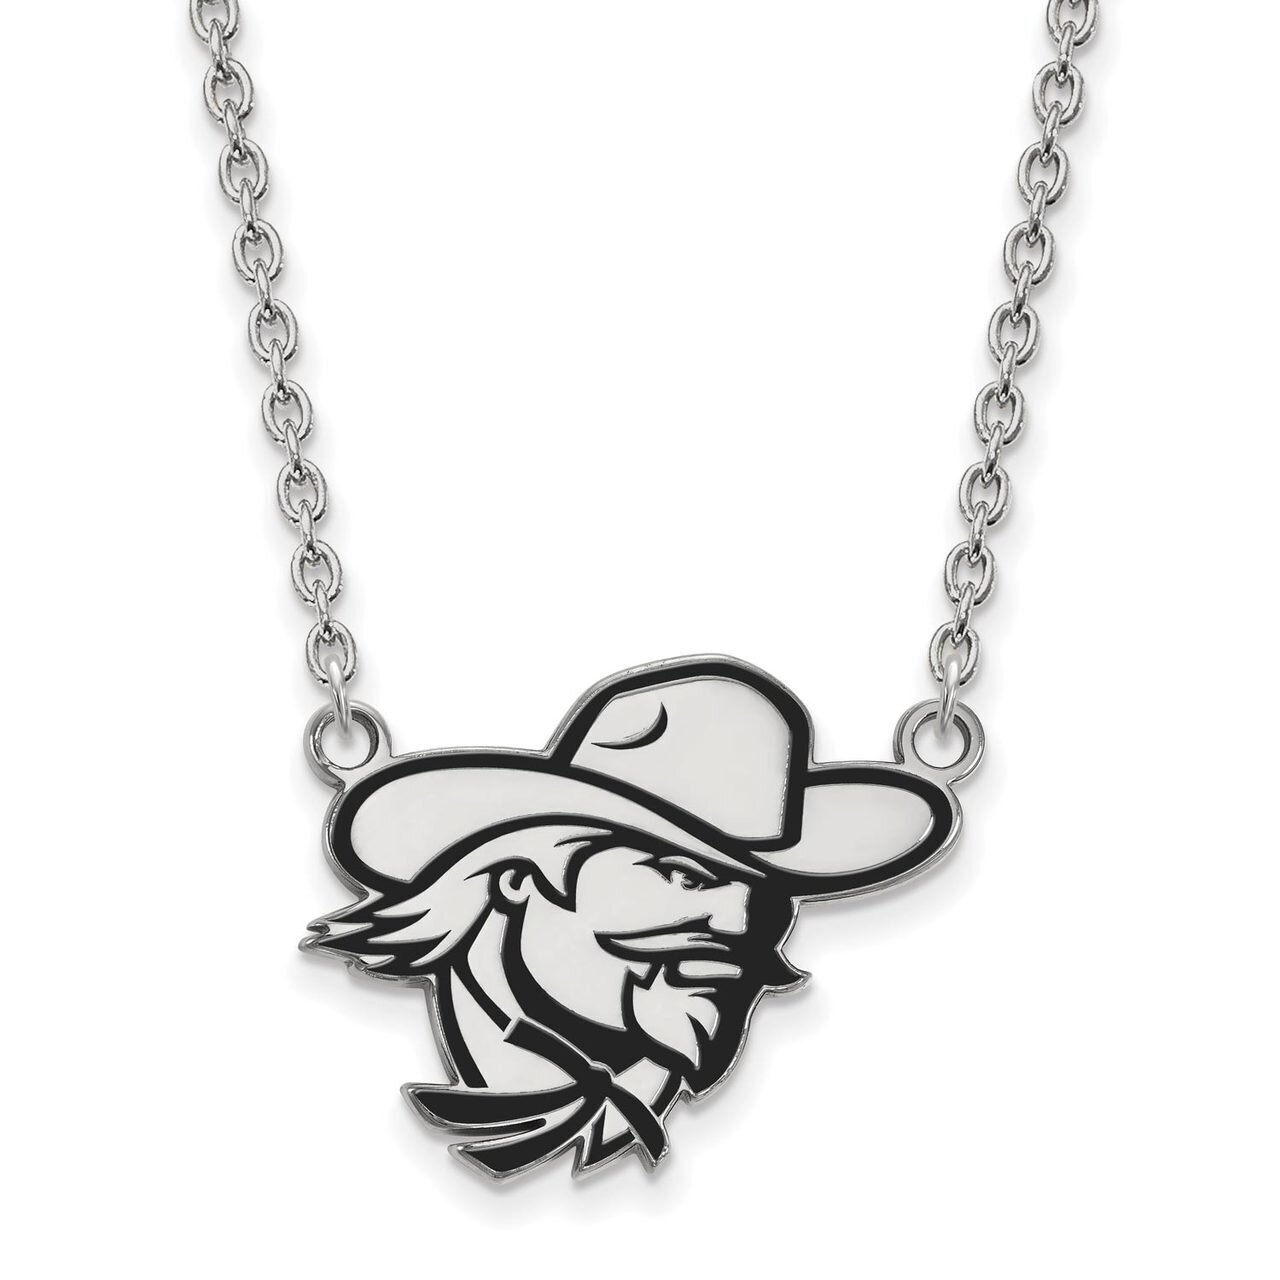 Eastern Kentucky University Large Enamel Pendant with Chain Necklace Sterling Silver SS021EKU-18